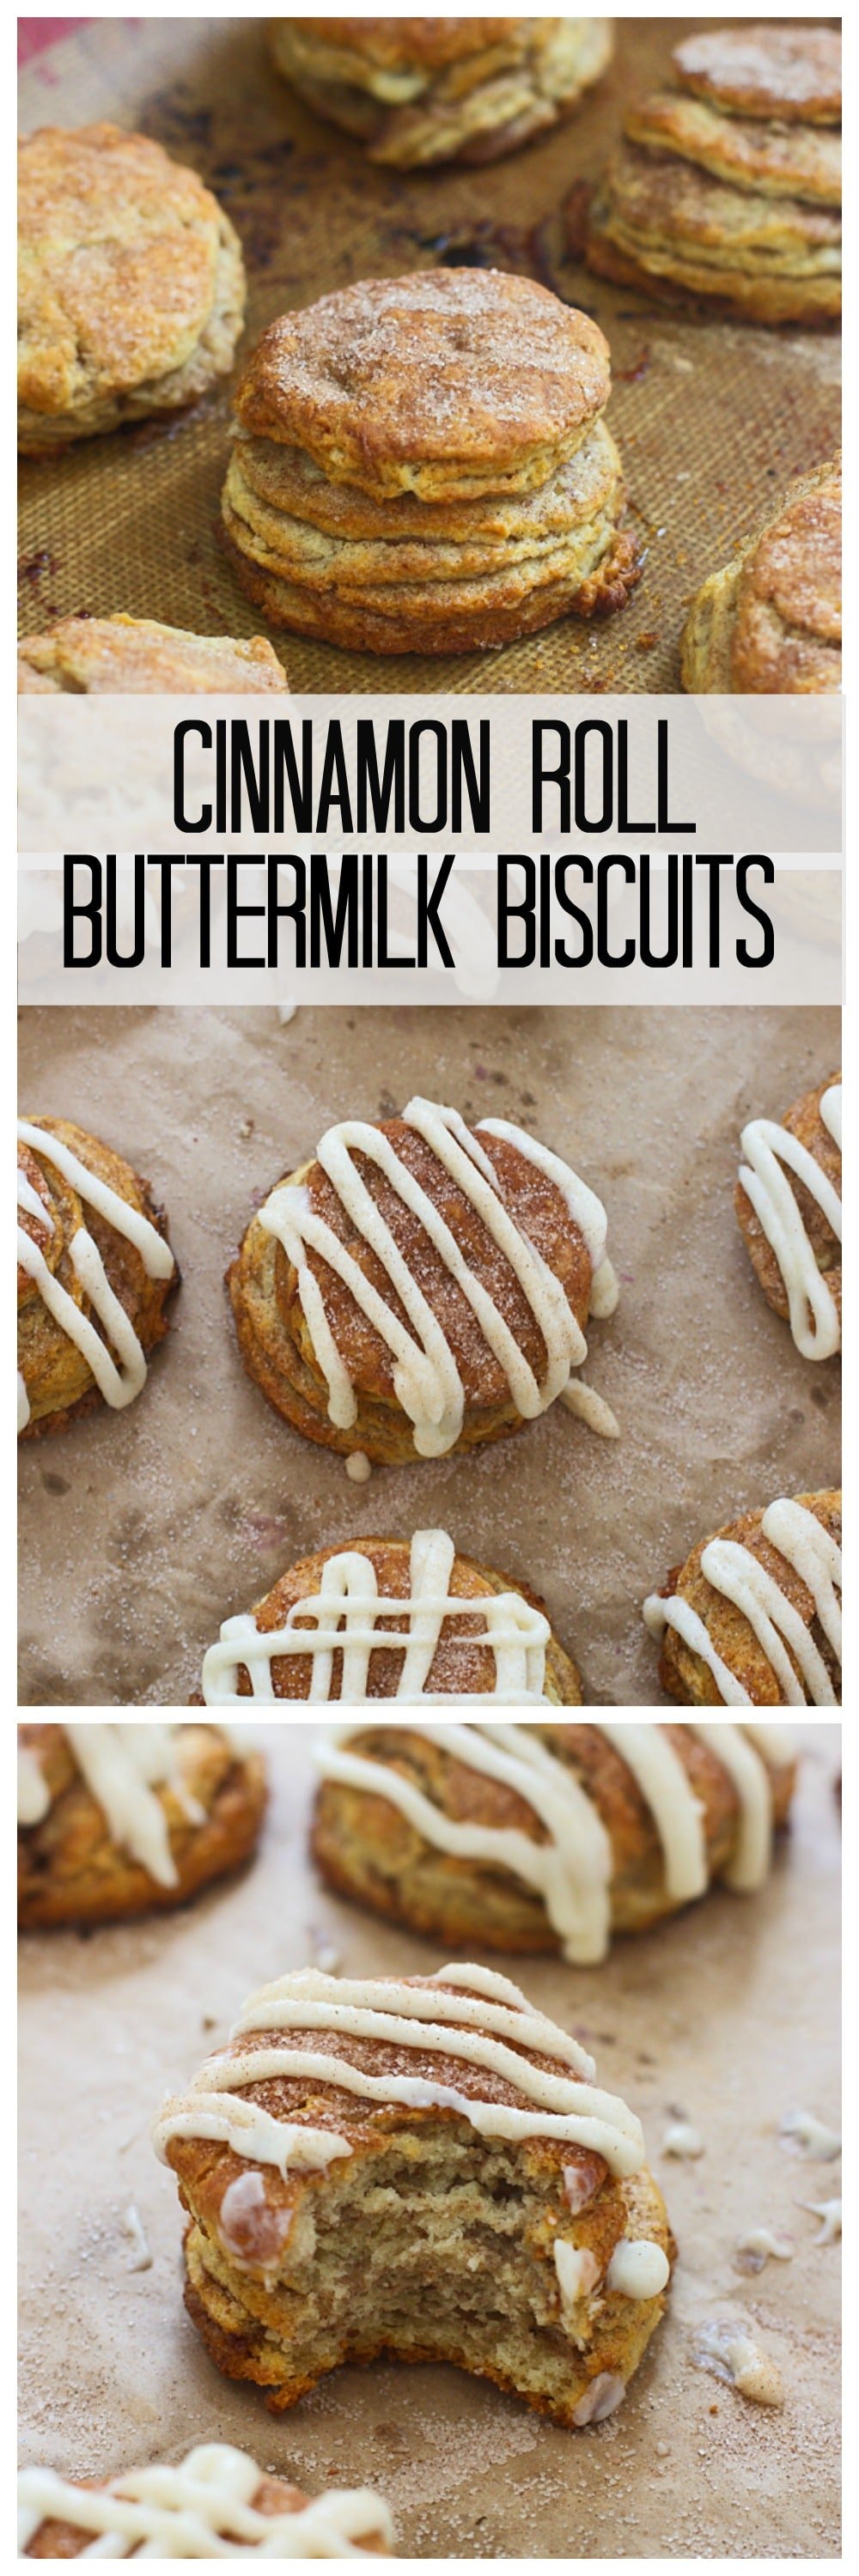 Cinnamon Roll Butterilk Biscuits - Super flaky layers of dough sprinkled with cinnamon and sugar and drenched in cream cheese frosting.